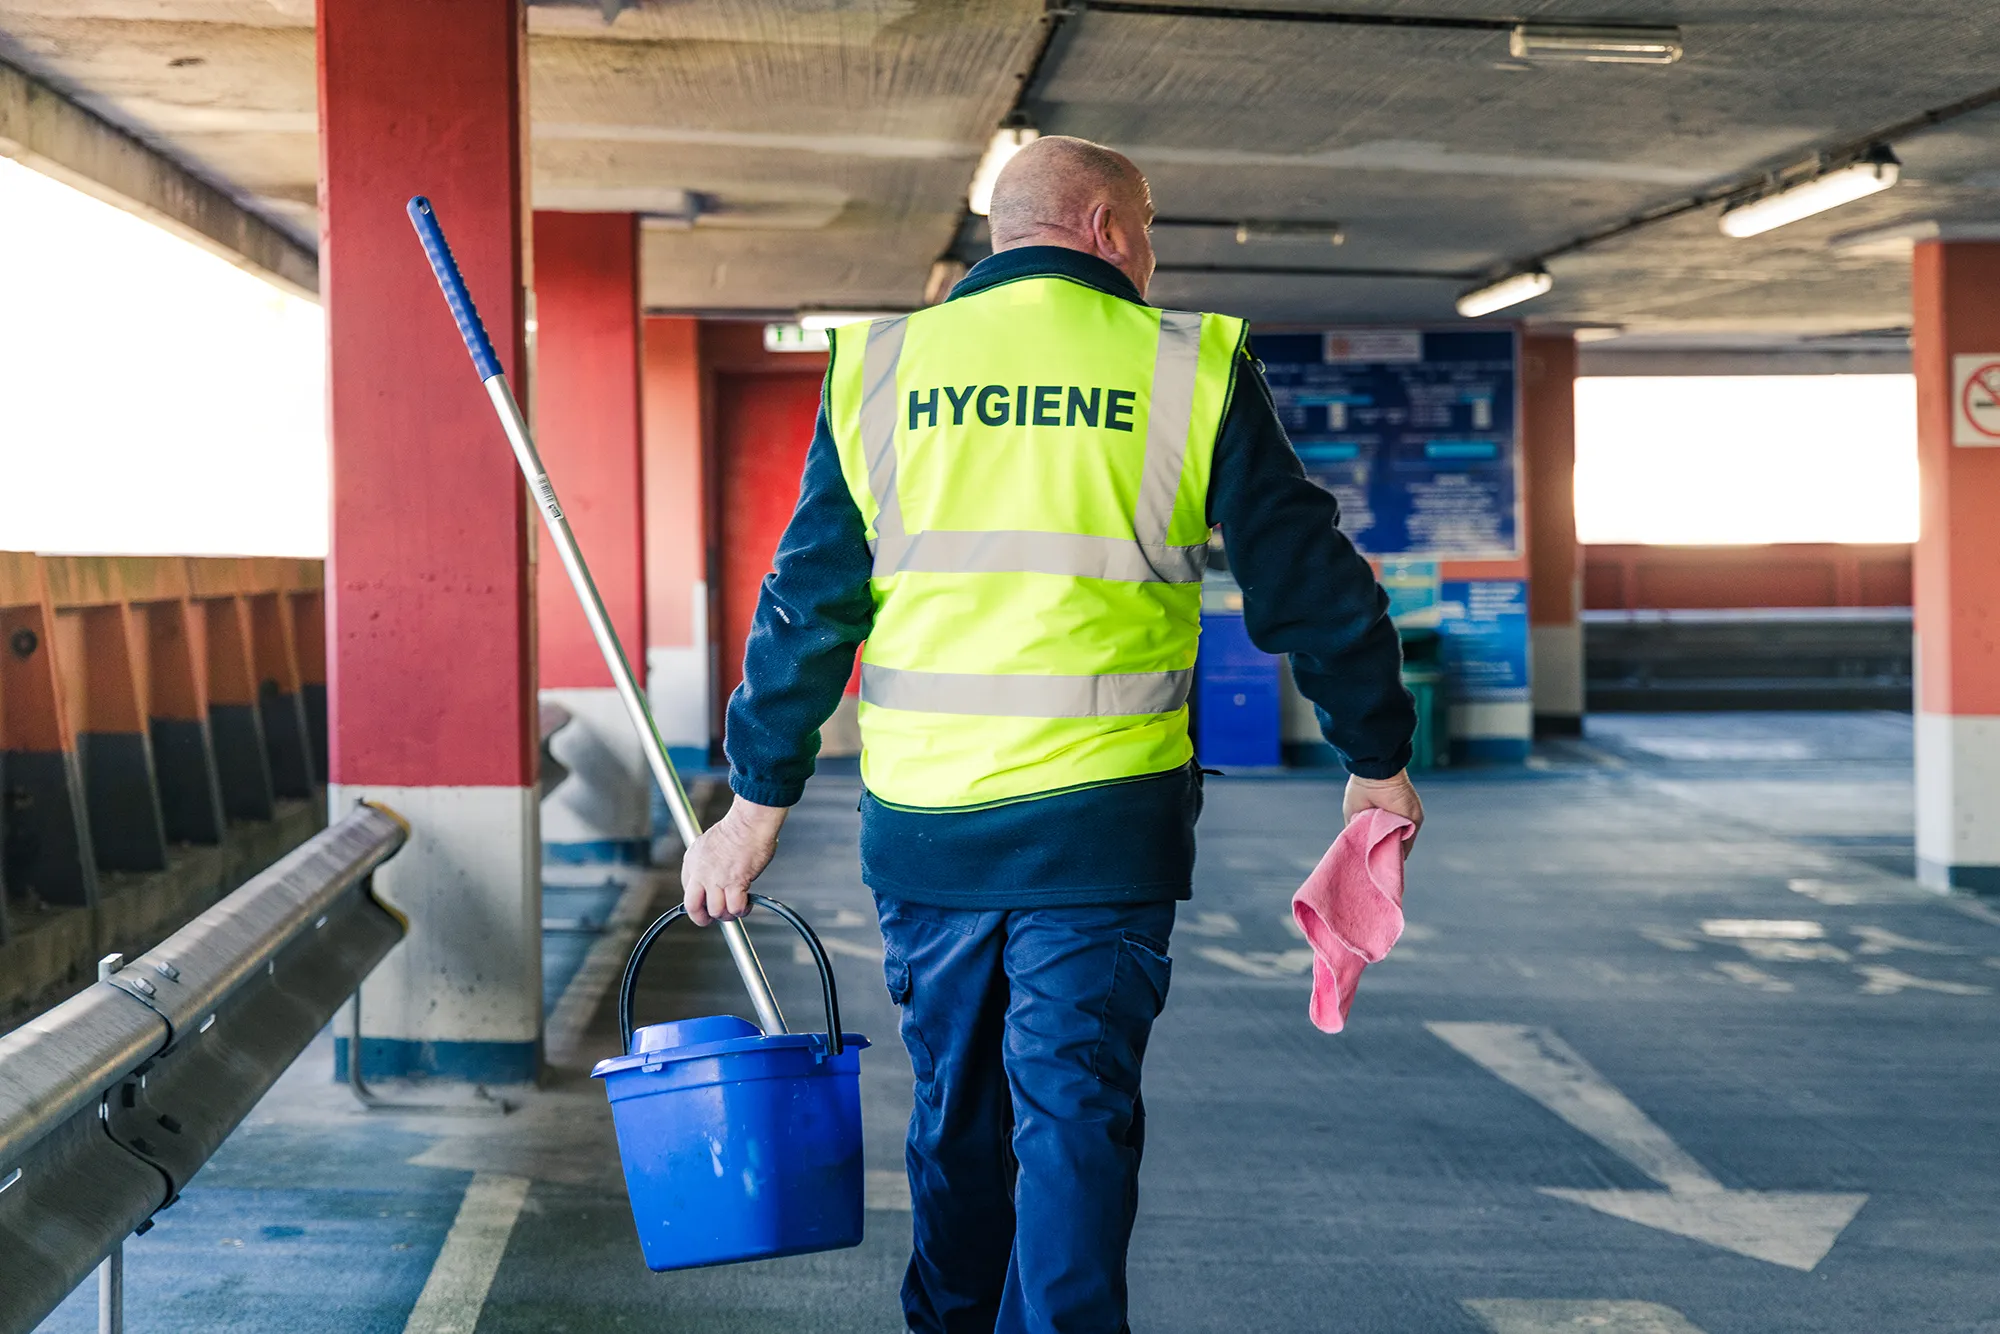 Specialist Hygiene cleaning services